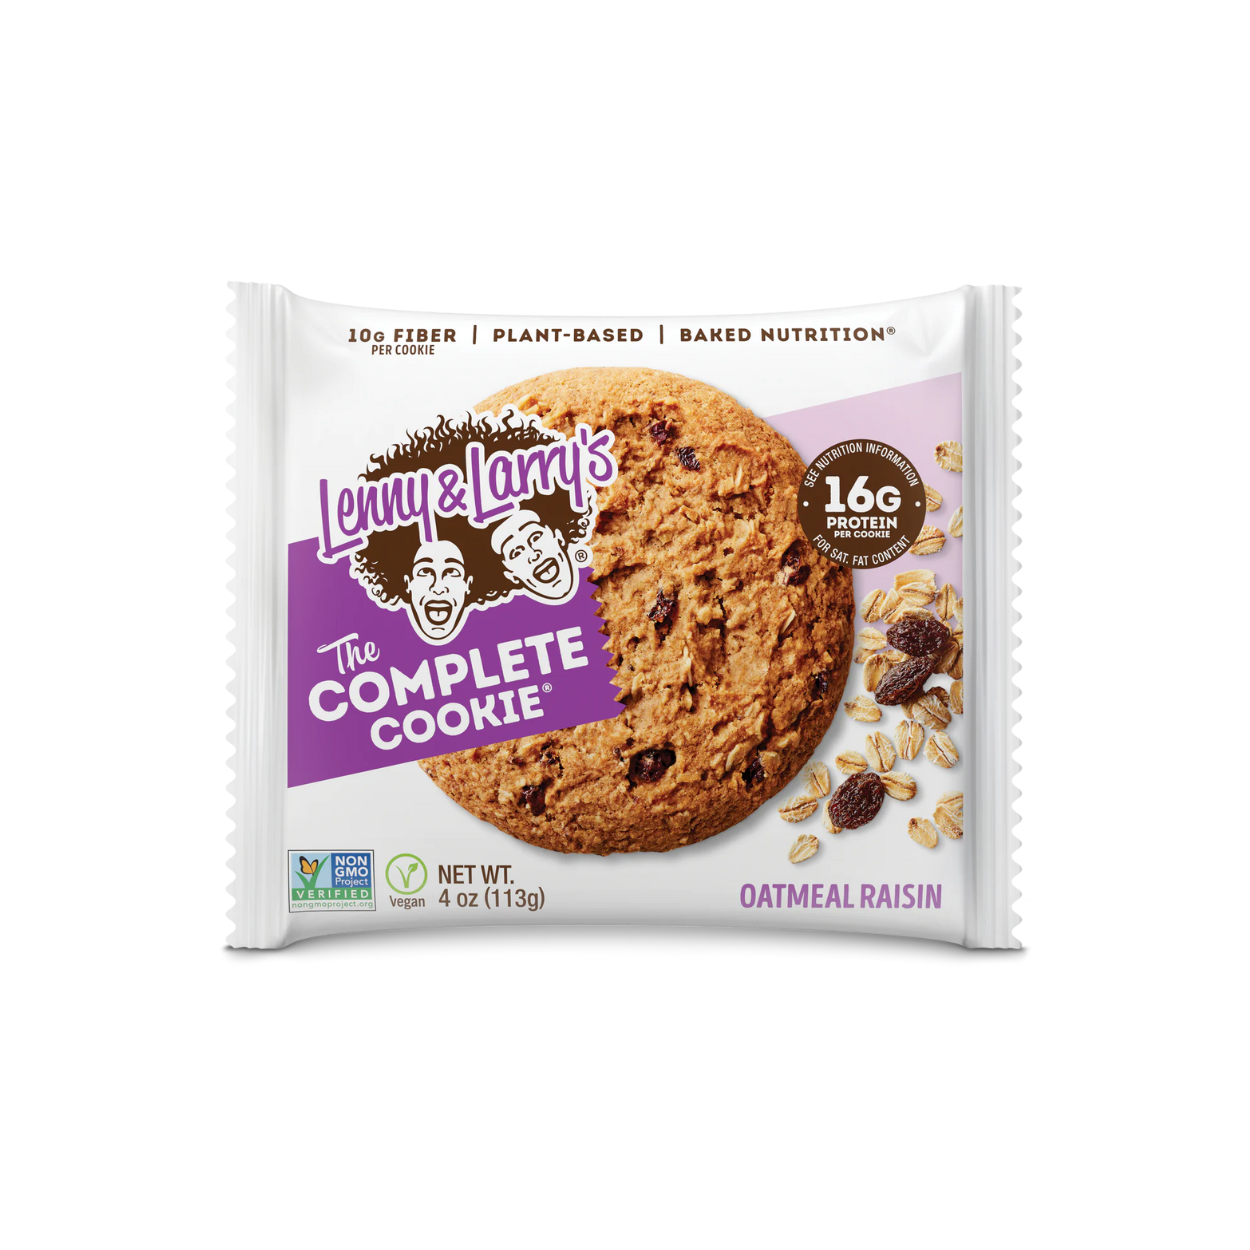 Lenny & Larrys The Complete Cookie Oatmeal Raisin (1-12x113g)